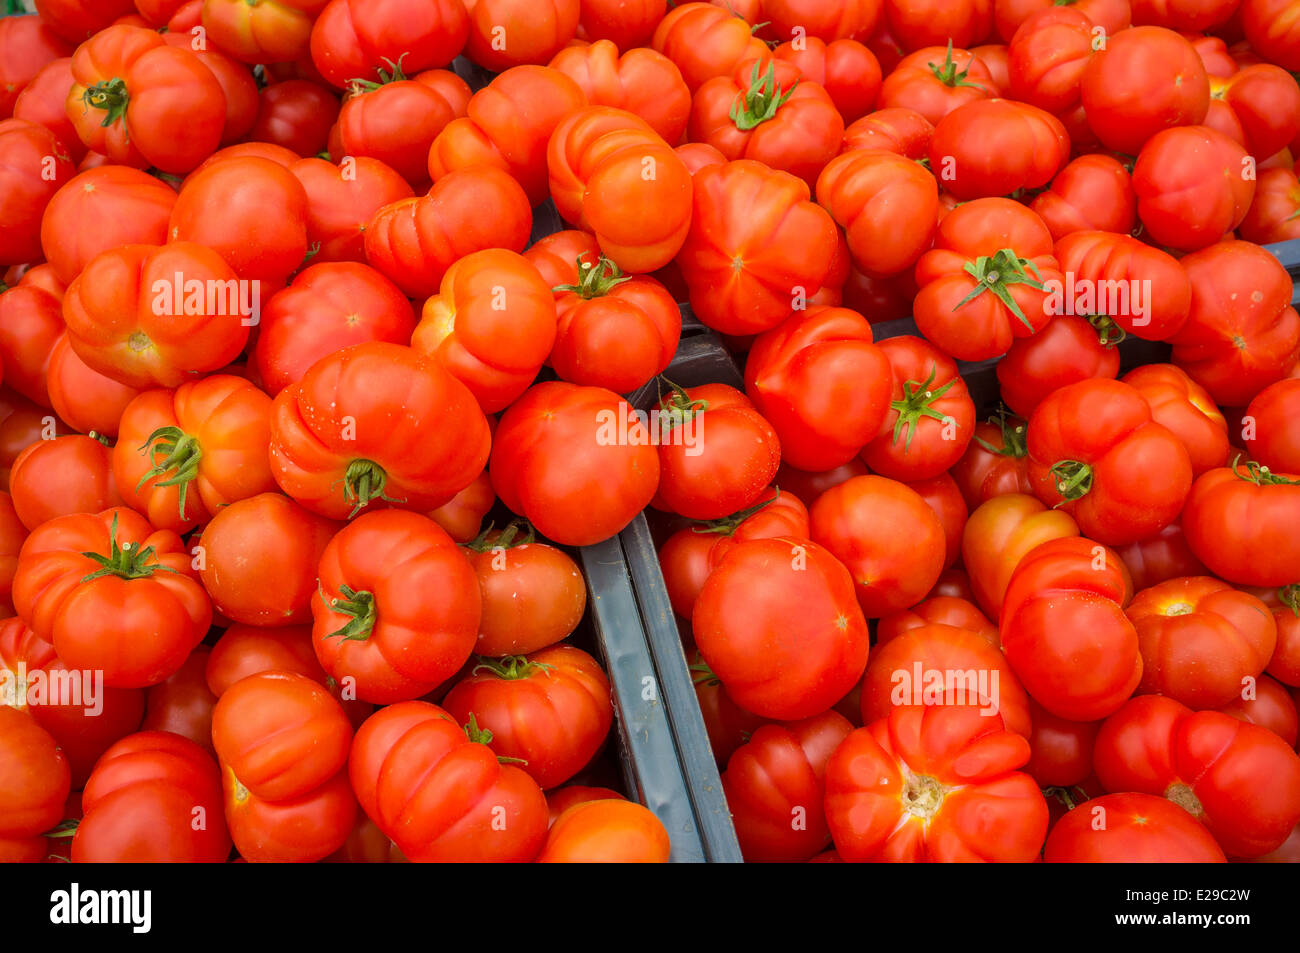 Full frame take of some crates with tomatoes on a market stall Stock Photo